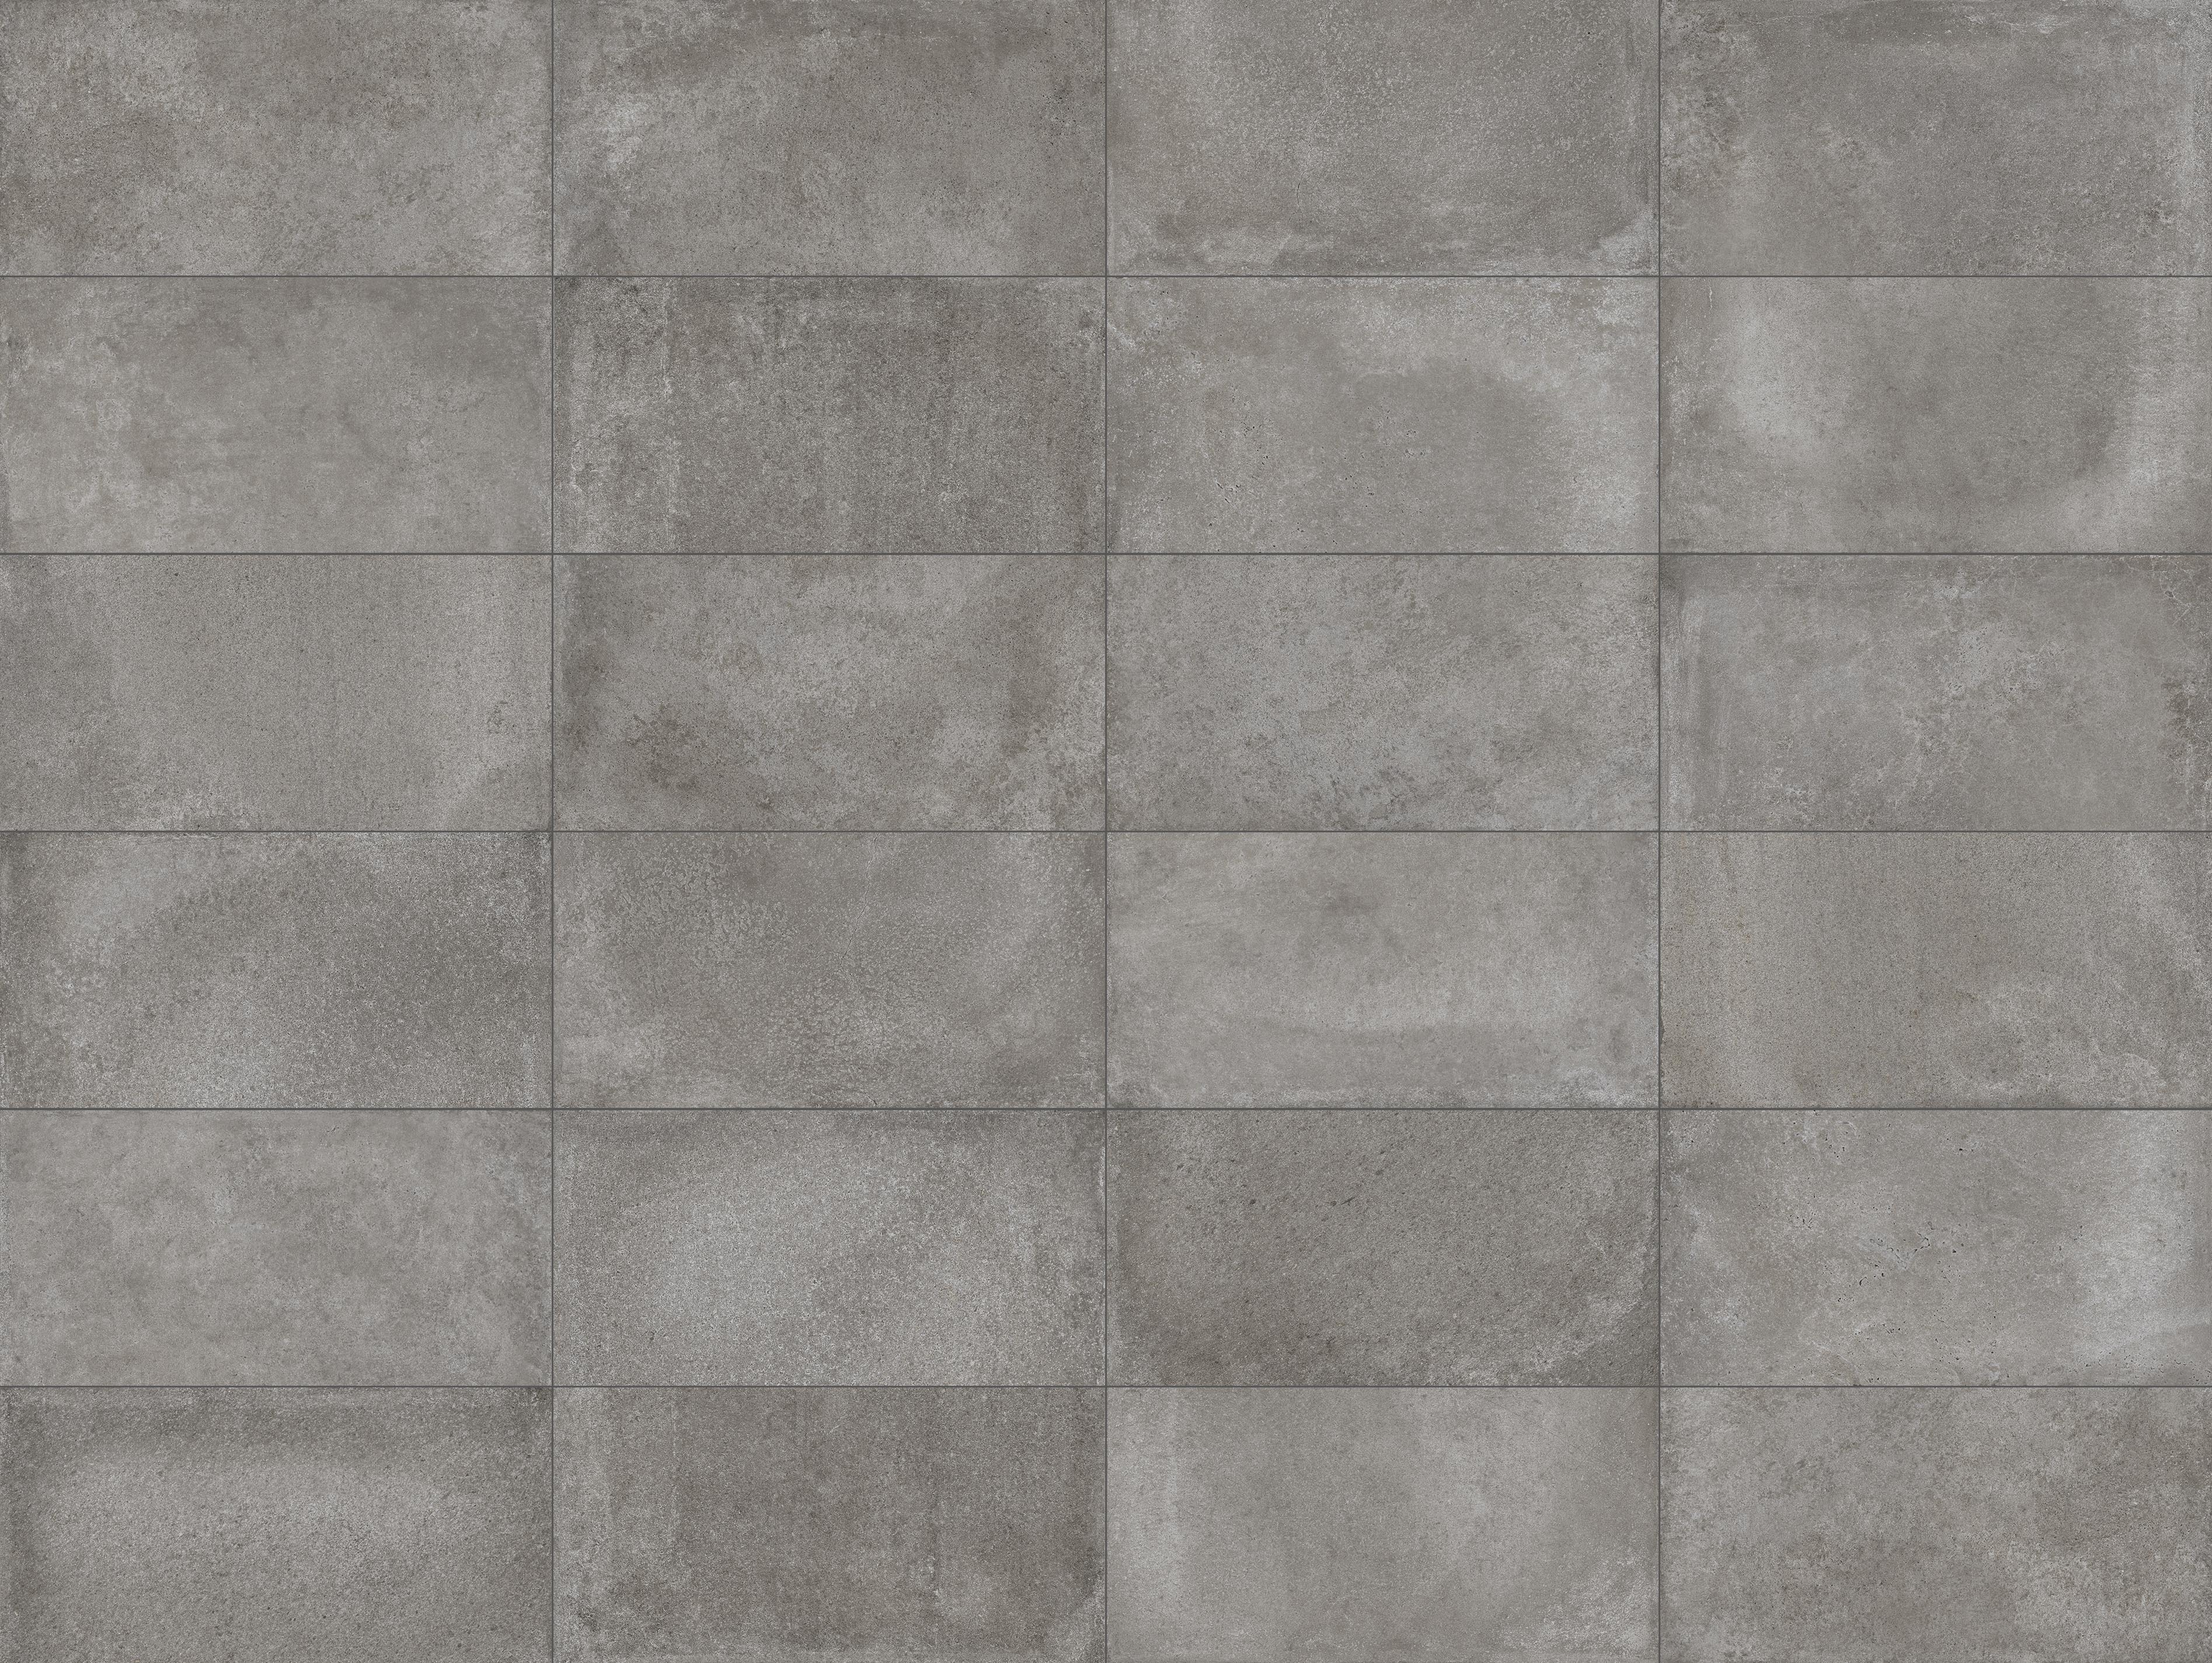 The latest in porcelain cement tiles, the most extensive range of 